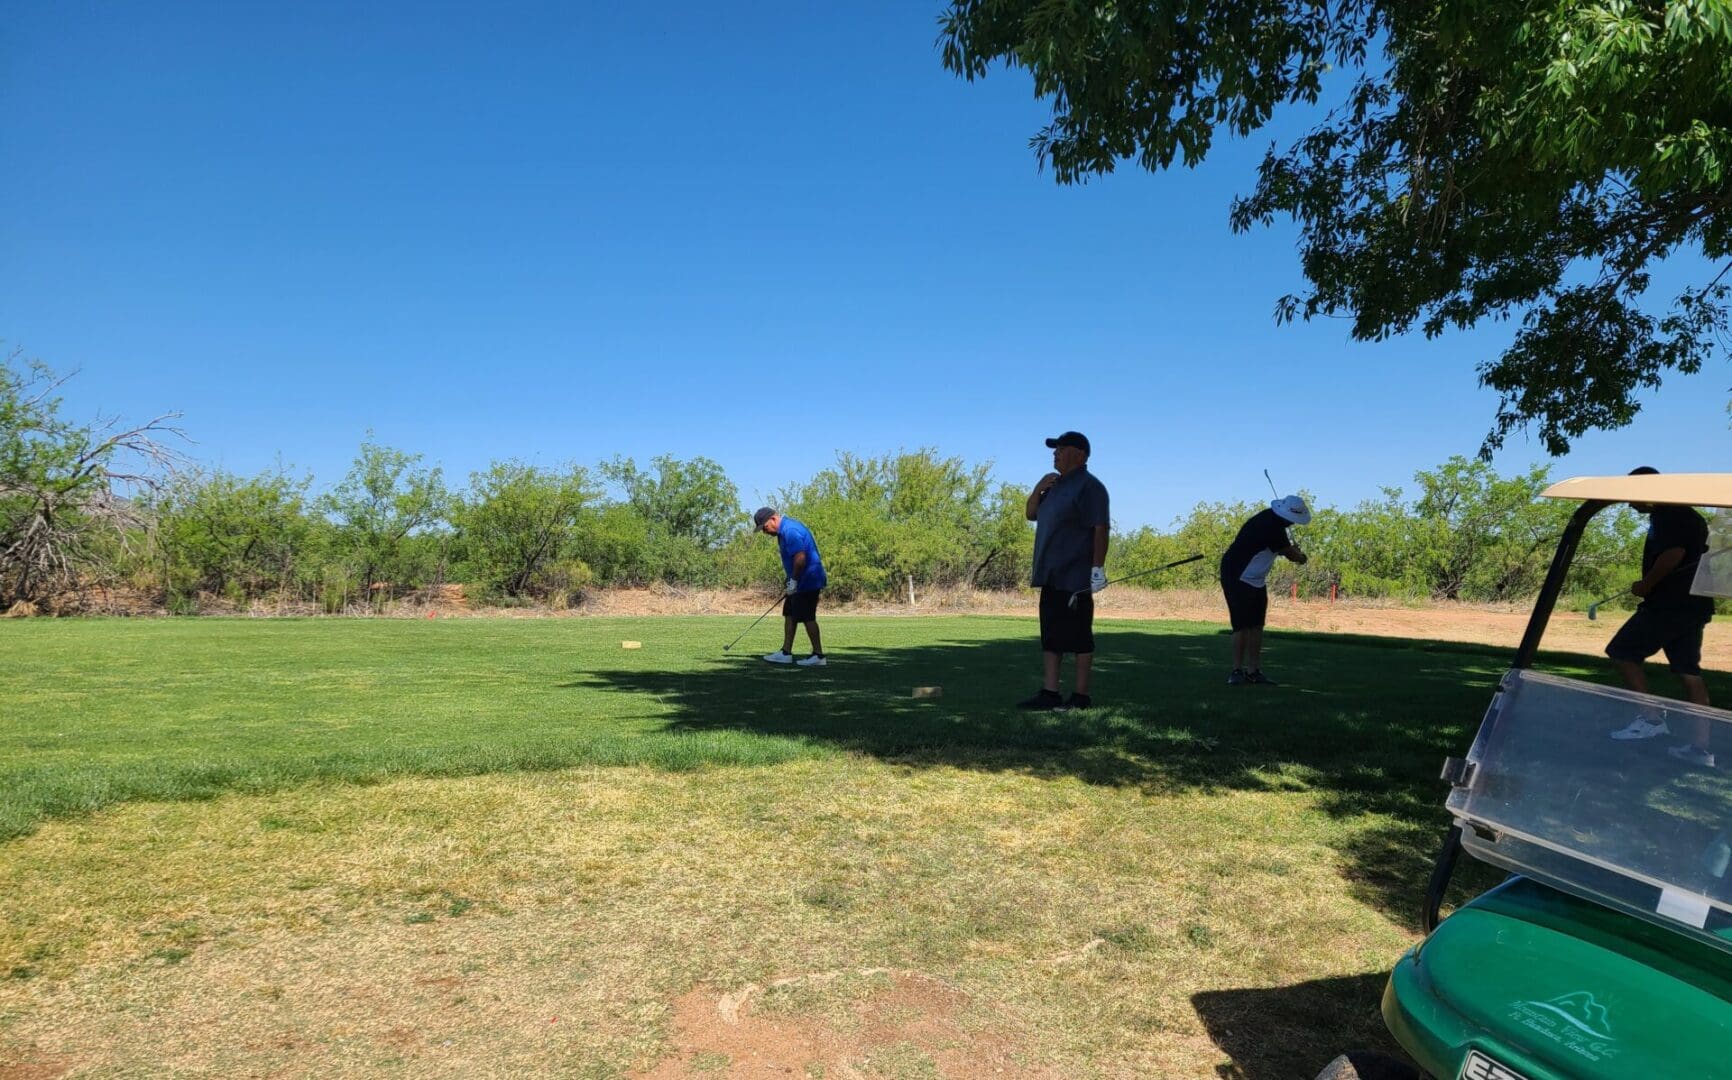 Three people playing golf on a sunny day.